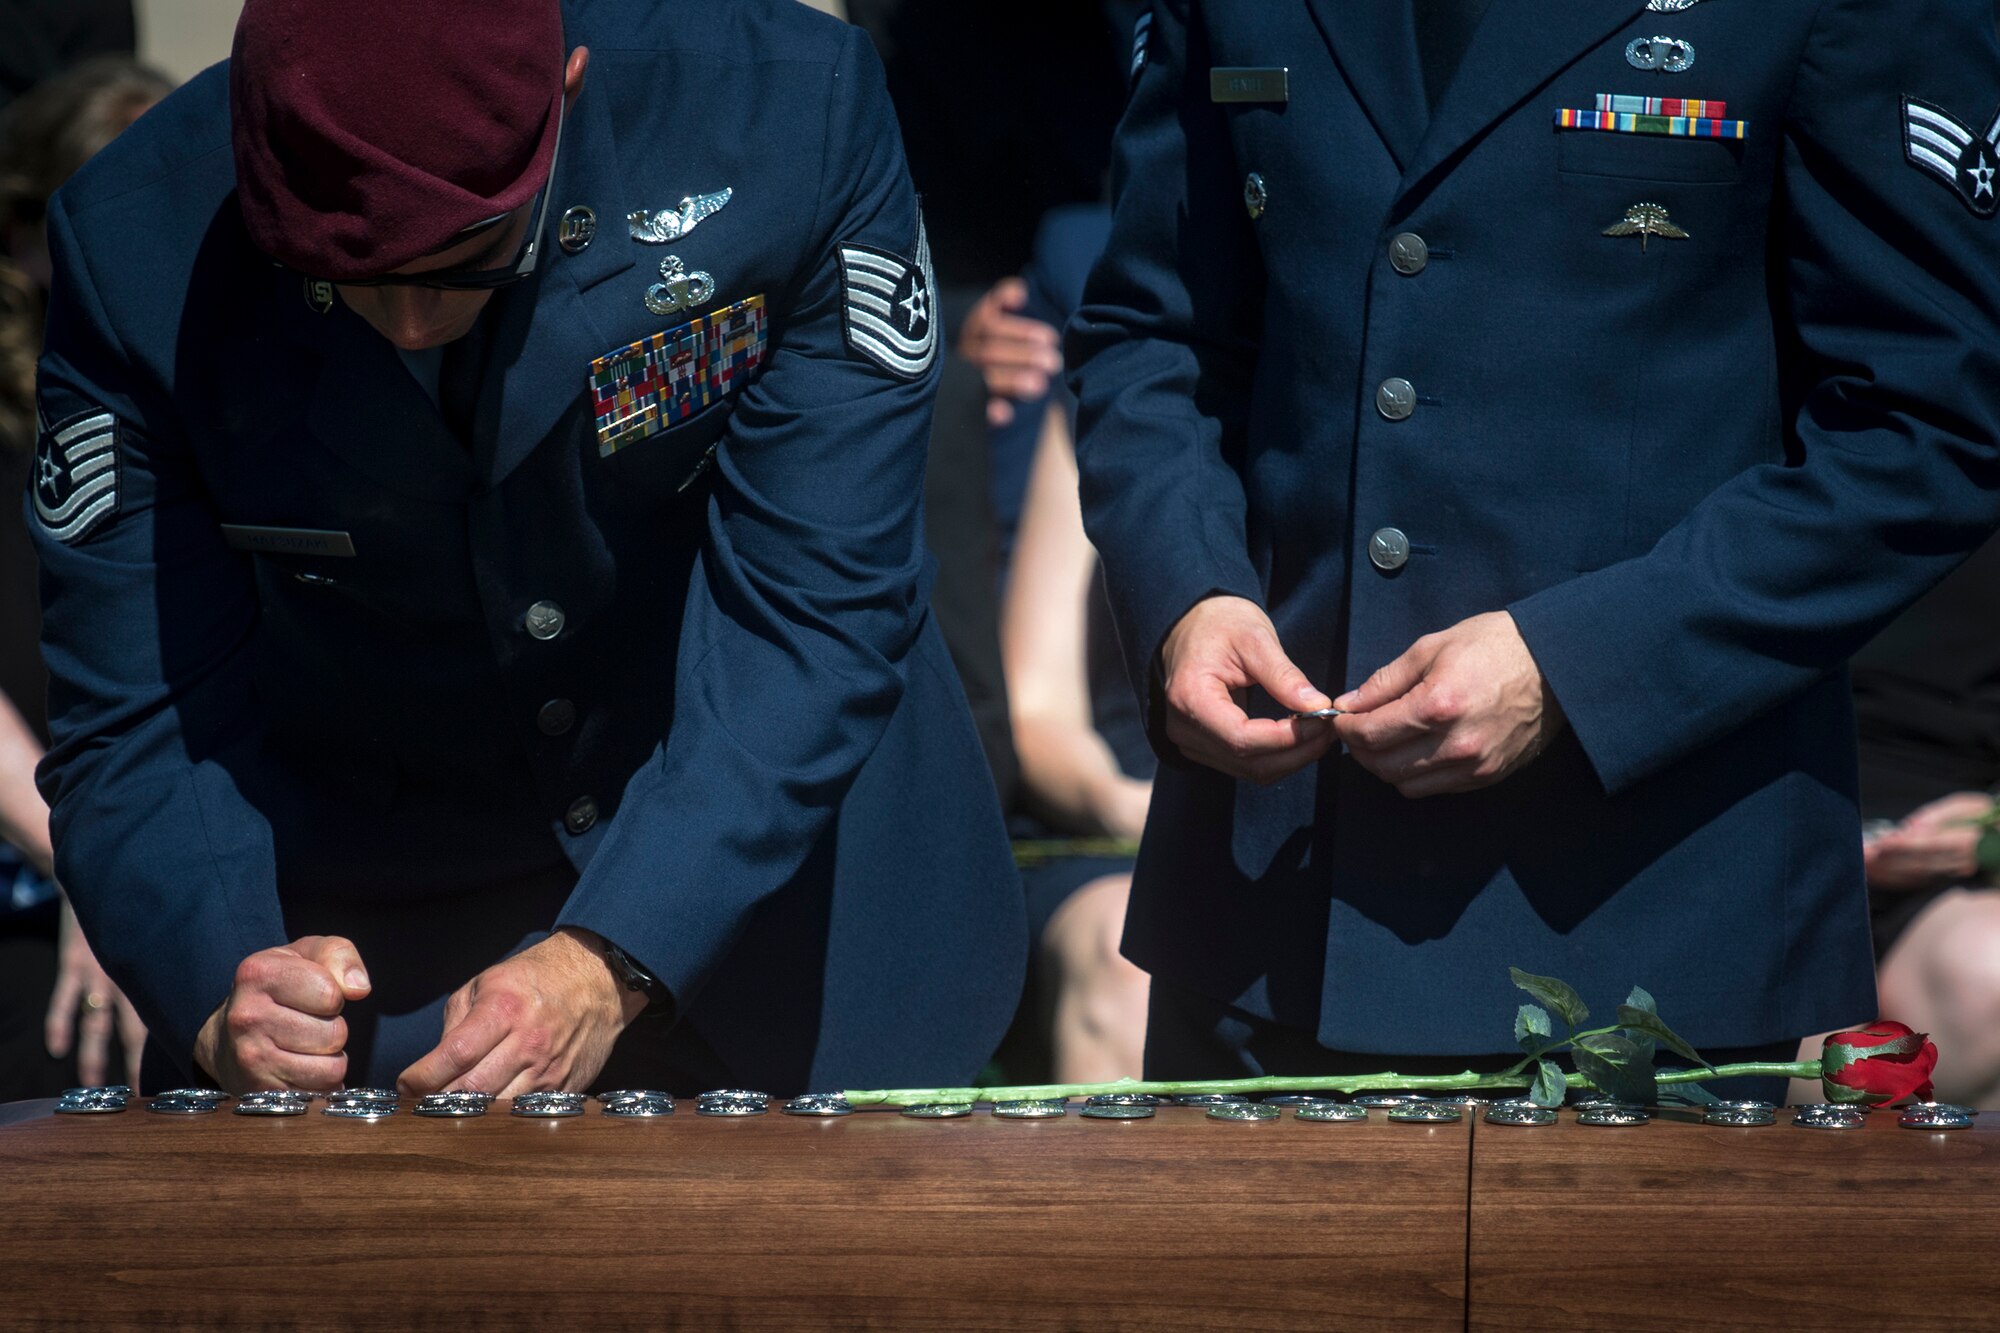 Pararescuemen pound their beret flashes into Capt. Mark Weber’s casket during his funeral service, July 9, 2018, at Arlington National Cemetery, Va. Weber, a 38th Rescue Squadron combat rescue officer and Texas native, was killed in an HH-60G Pave Hawk crash in Anbar Province, Iraq, March 15. Friends, family, and Guardian Angel Airmen traveled from across the U.S. to attend the ceremony and pay their final respects. (U.S. Air Force photo by Staff Sgt. Ryan Callaghan)